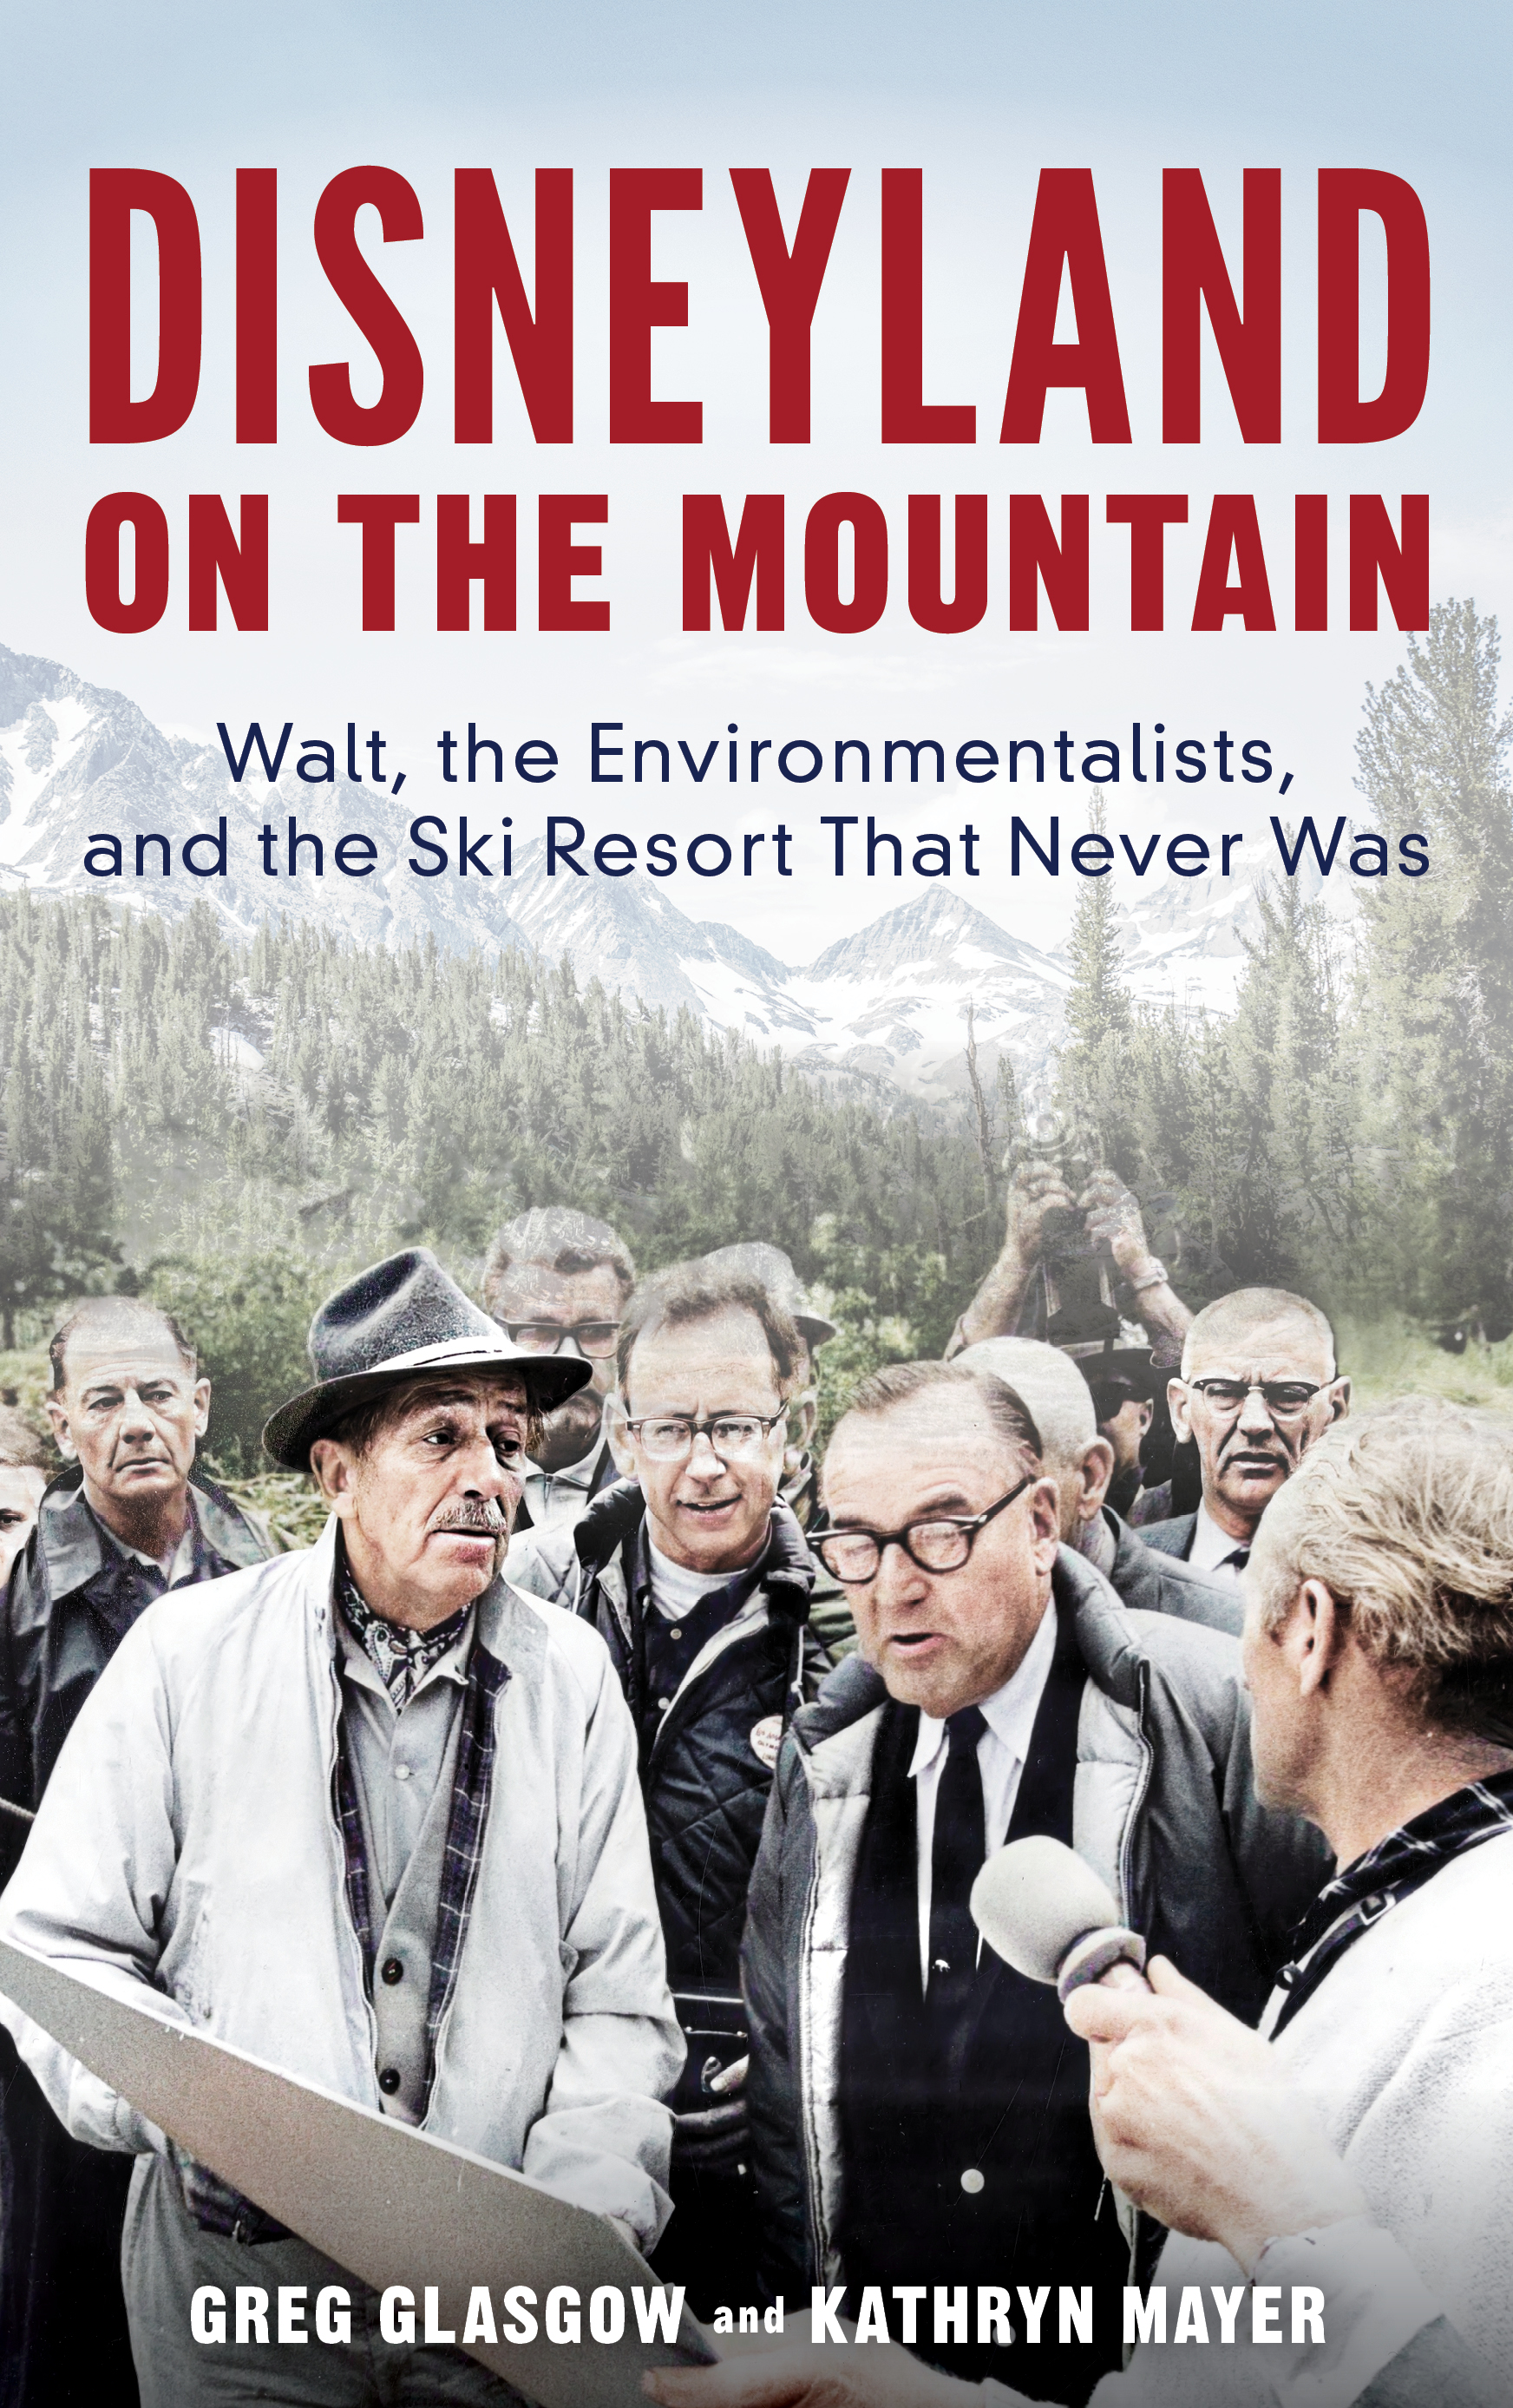 Book cover of Disneyland on the Mountain: Walt, the Environmentalists and the Ski resort that never was, which depicts Walt Disney as an older man, surrounded by scientists and reporters against a green mountainous landscape.